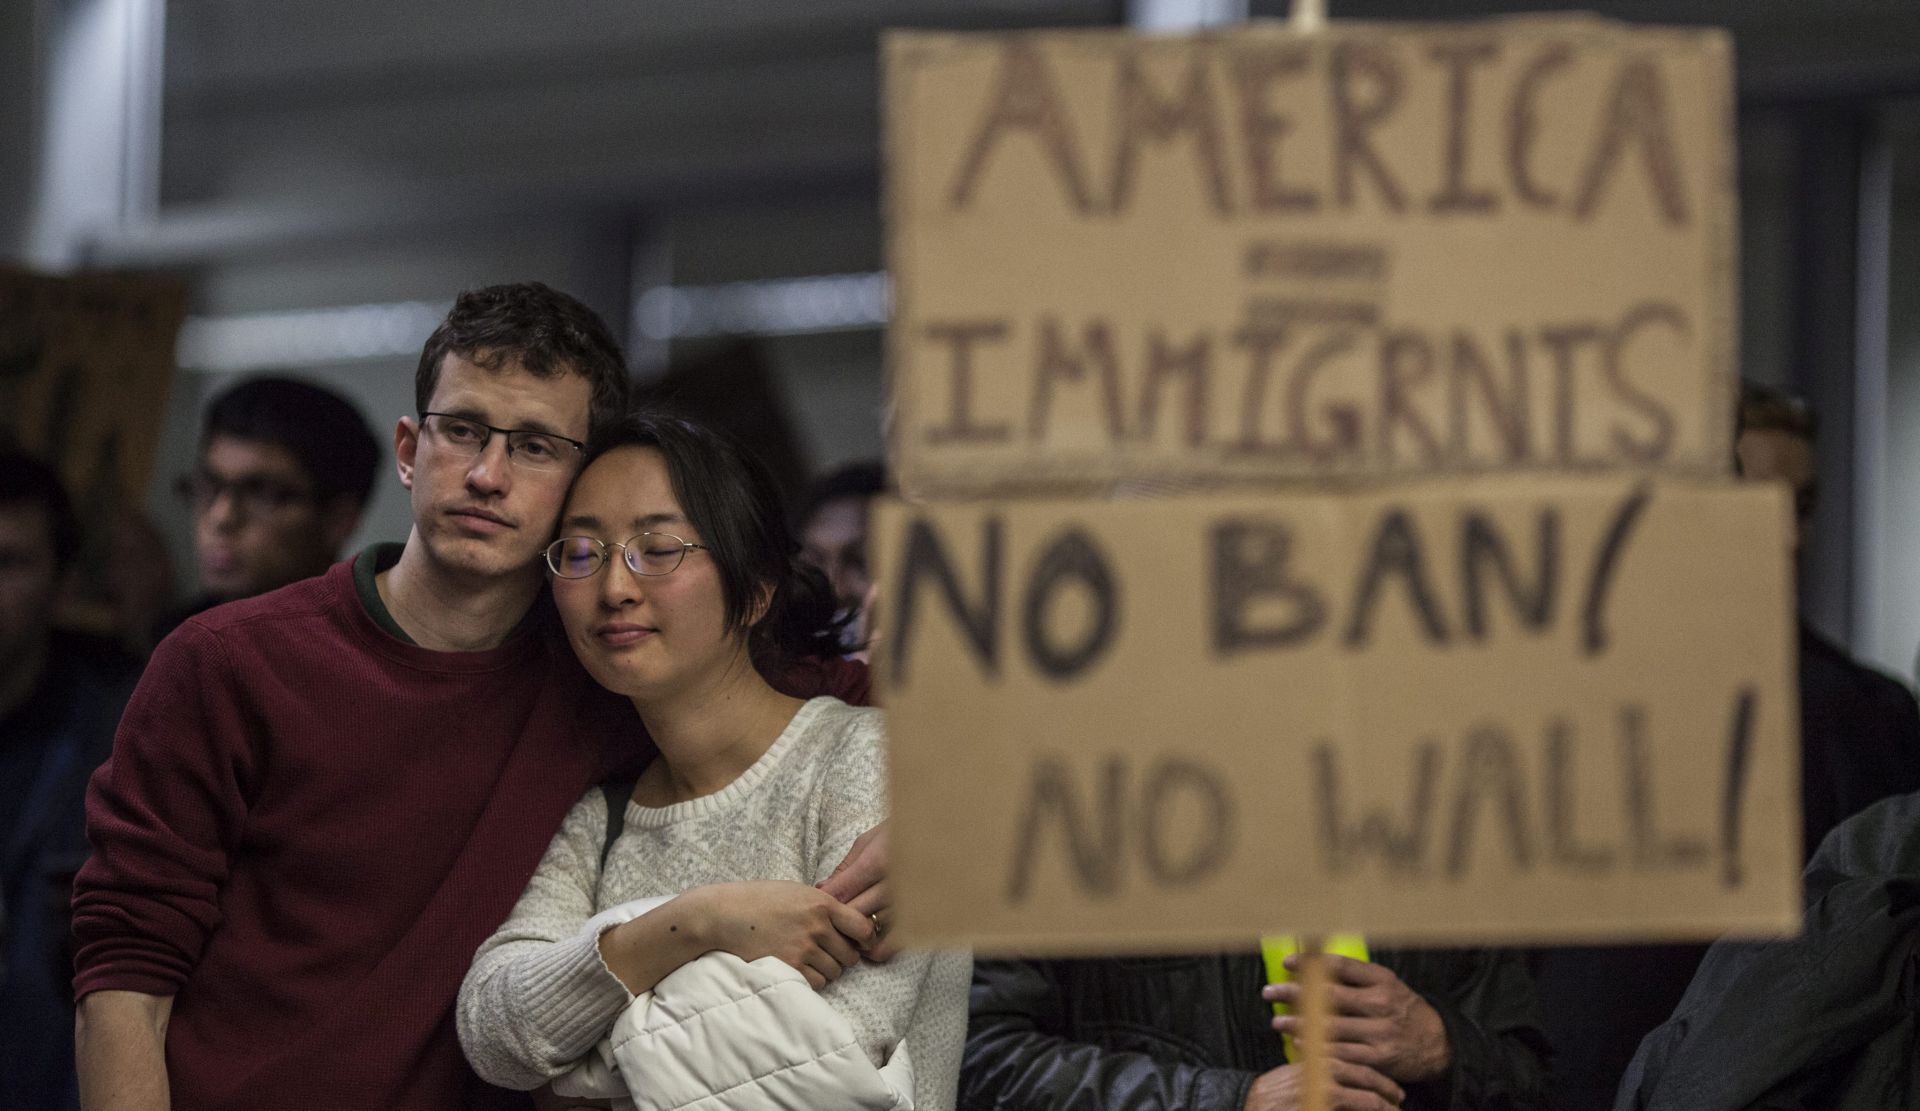 epa05758177 People gather for a protest at the Arrivals Hall of San Francisco's SFO International Airport after people arriving from Muslim-majority countries were held at the border control as a result of the new executive order by US President Donald Trump in San Francisco, California, USA, 28 January 2017. According to reports, thousands of people took part in the demonstration as people from countries on the suspension list were reportedly held at the airport. US federal judge issued an emergency stay for visa holders and refugees that have been detained at airports following US President Donald Trump's executive order, halting all refugee entry for 120 days and for 90 days bans entry from seven countries: Iran, Iraq, Libya, Somalia, Sudan, Syria and Yemen.  EPA/PETER DASILVA